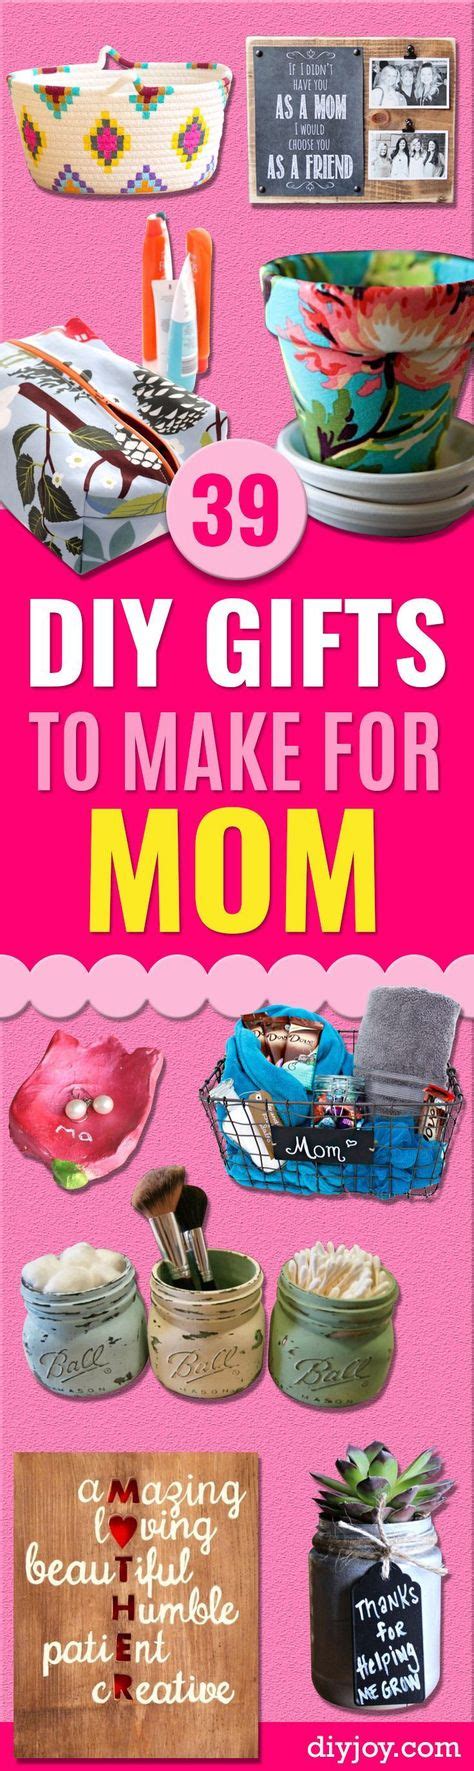 Creative Diy Gifts To Make For Mom Diy Gifts On A Budget Diy